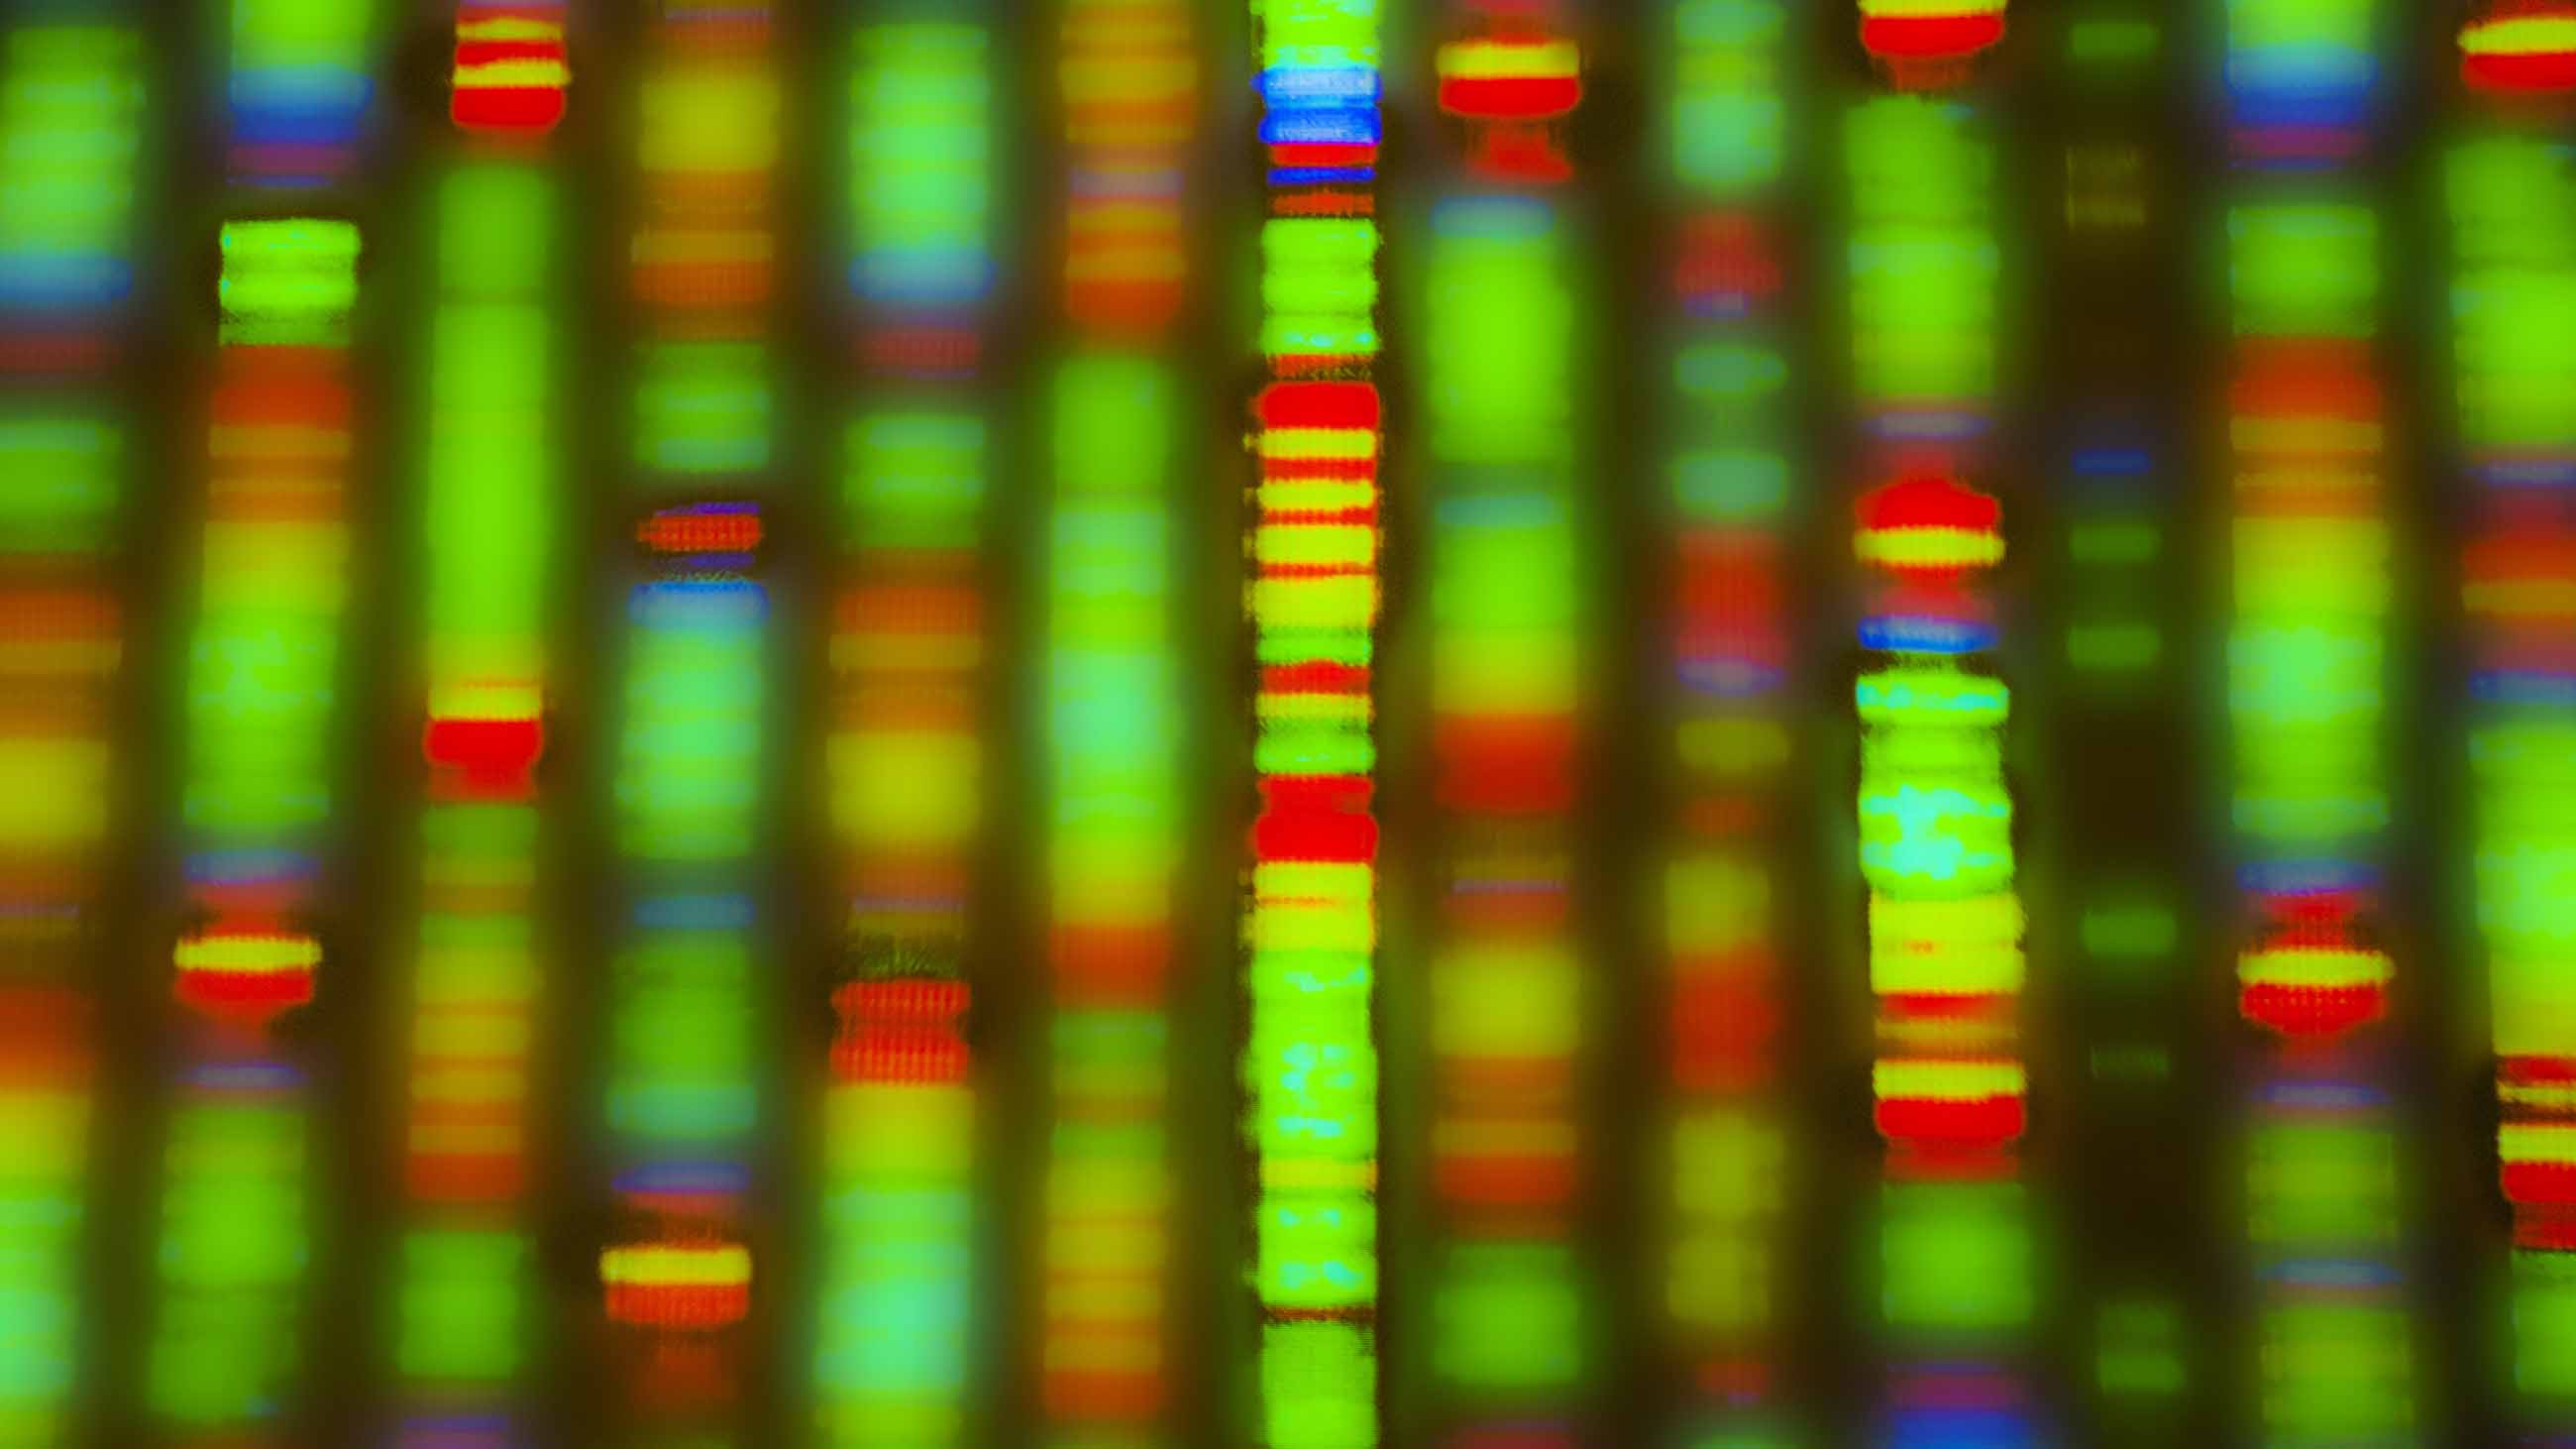 A bill approved by a House committee last week would allow employers to impose penalties on employees who opt out of sharing their genetic information.